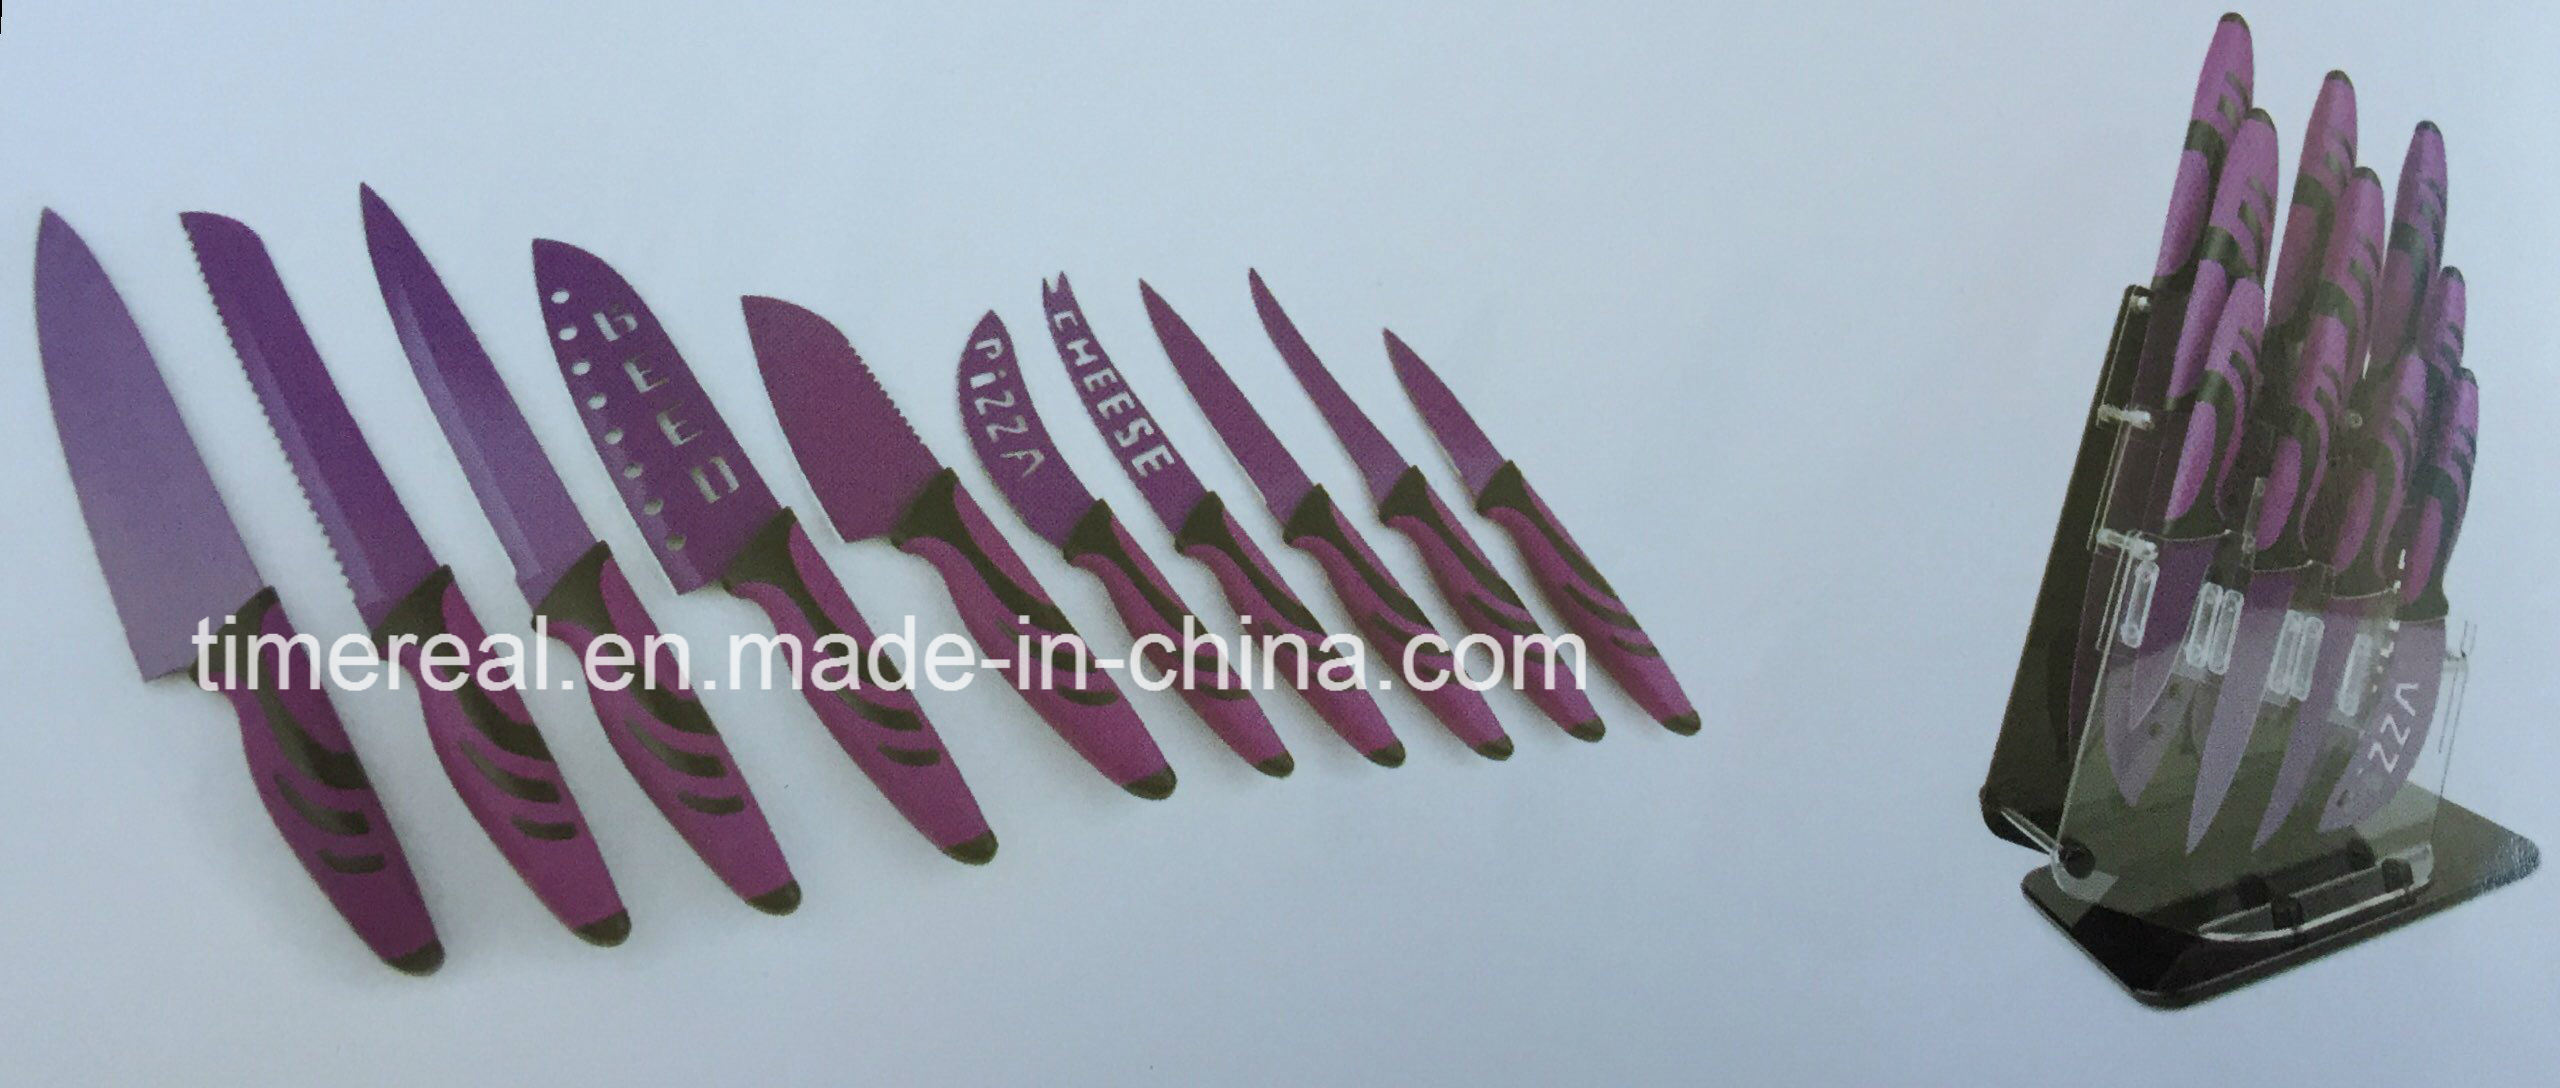 OEM Customized Cutting Finger Guard -
 Stainless Steel Kitchen Knives Set with Painting No. Fj-0035 – Long Prosper